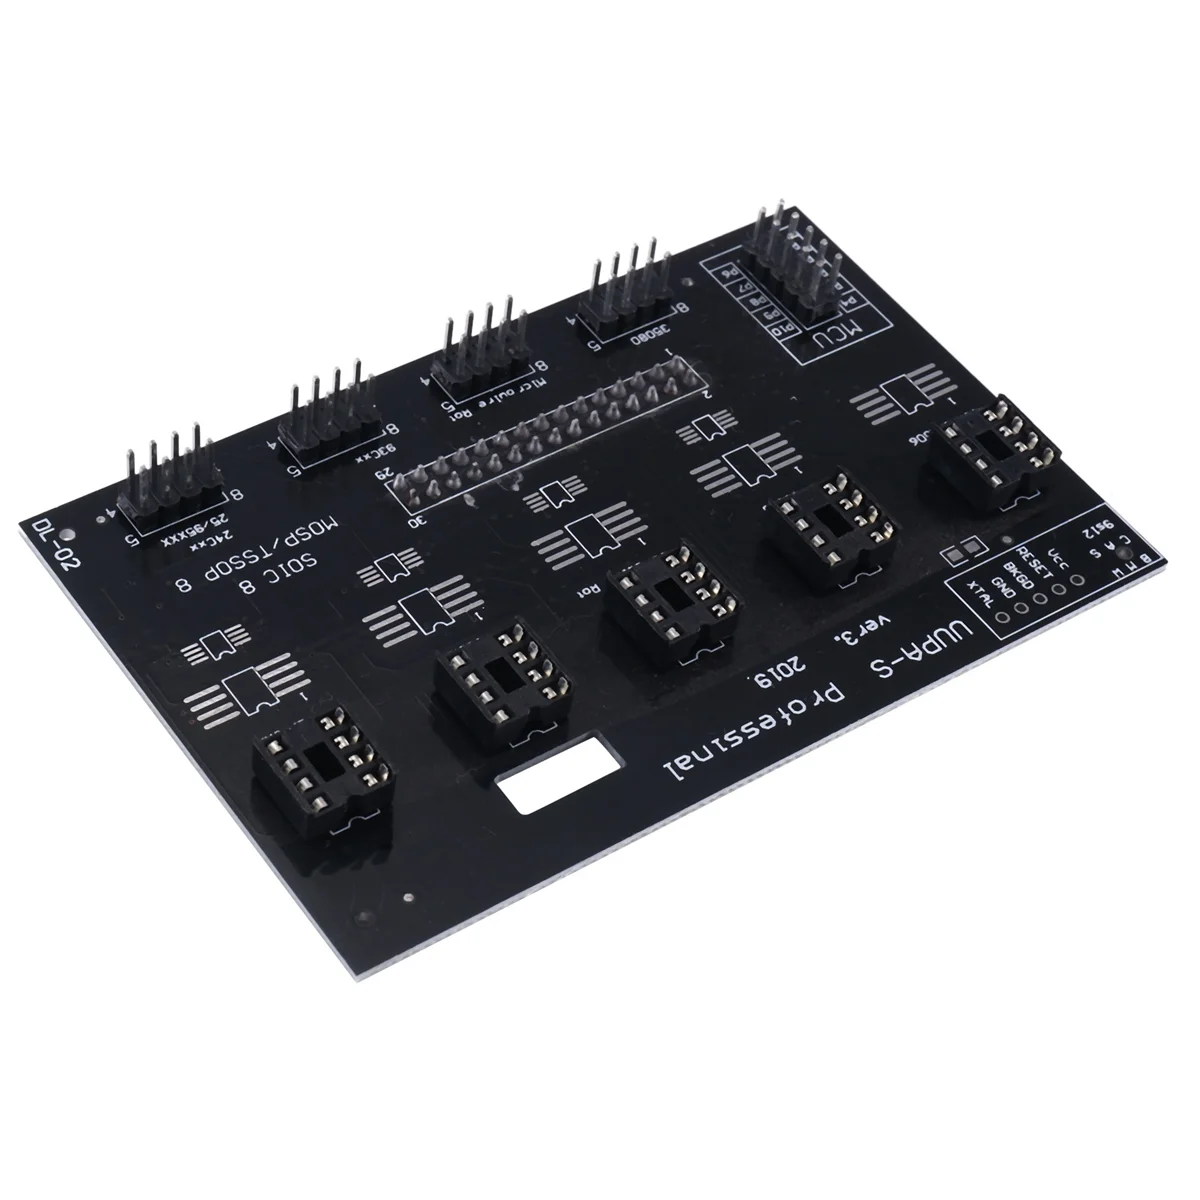 

UPA USB Universal Eeprom Adapter UPA USB V1.3 ECU Programmer for I2C/SPI Microwire Eeprom Programming( Without Cable)